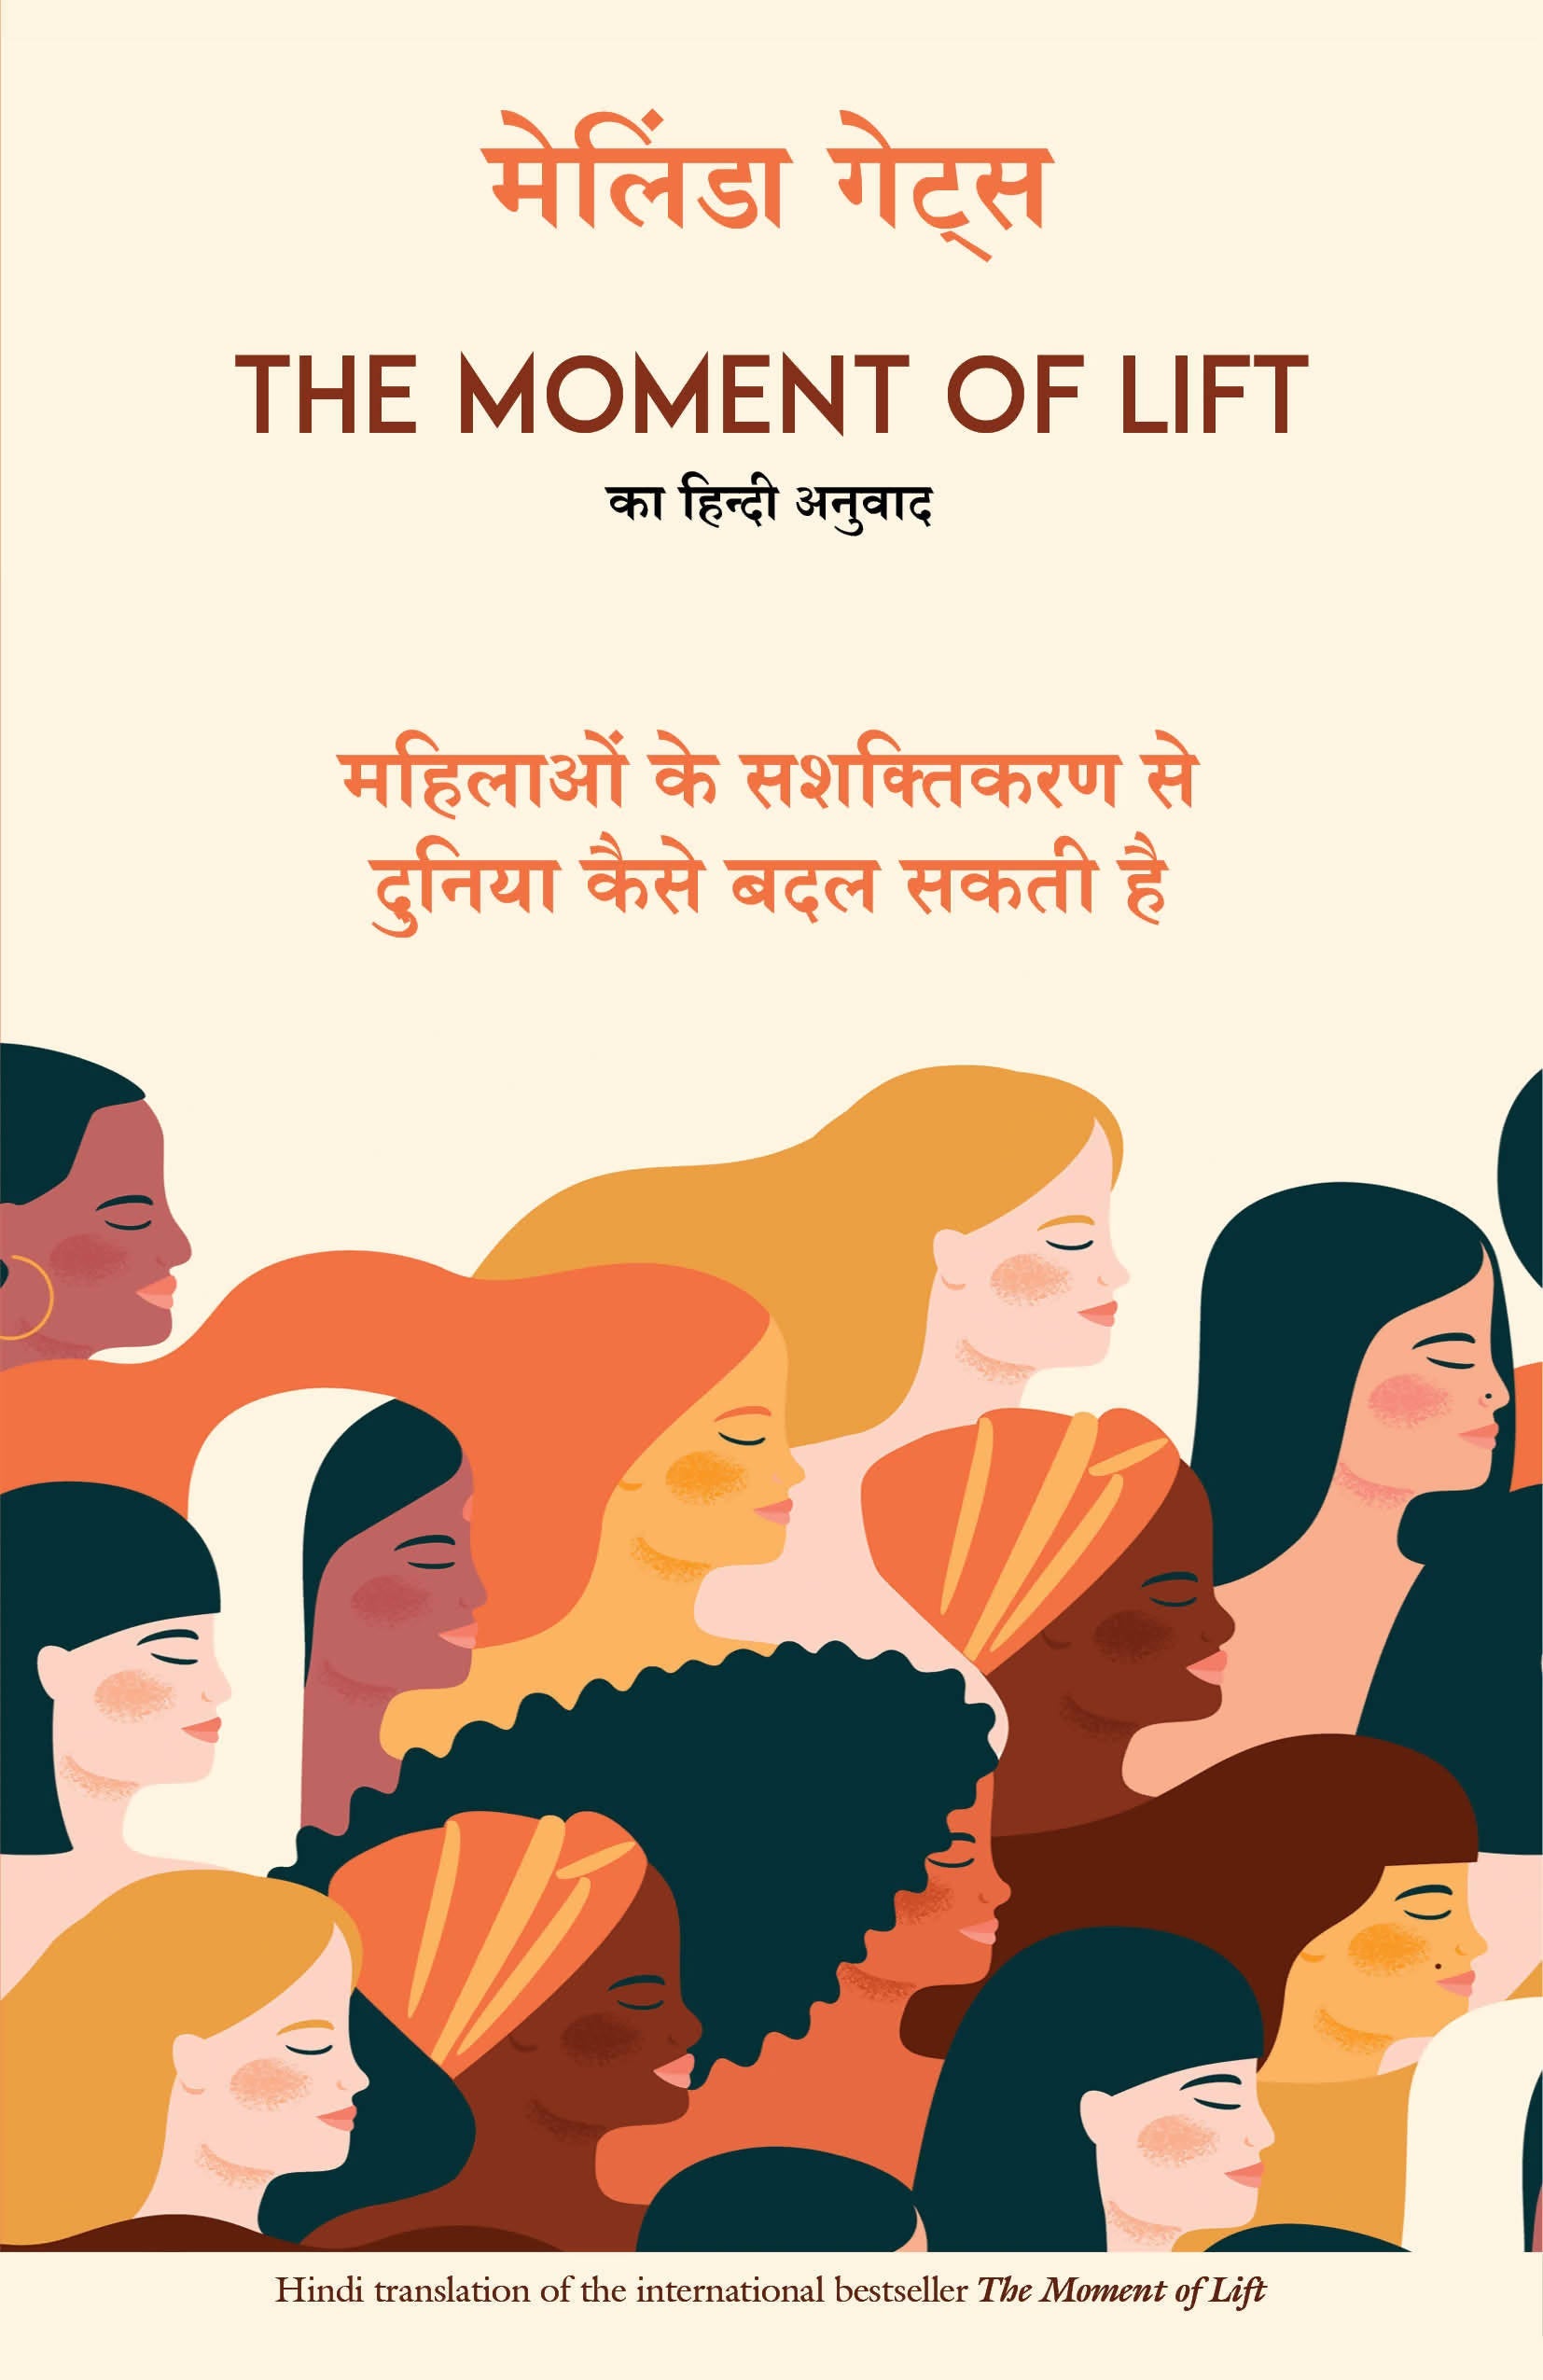 The Moment of Lift: How Empowering Women Changes The World (Hindi)